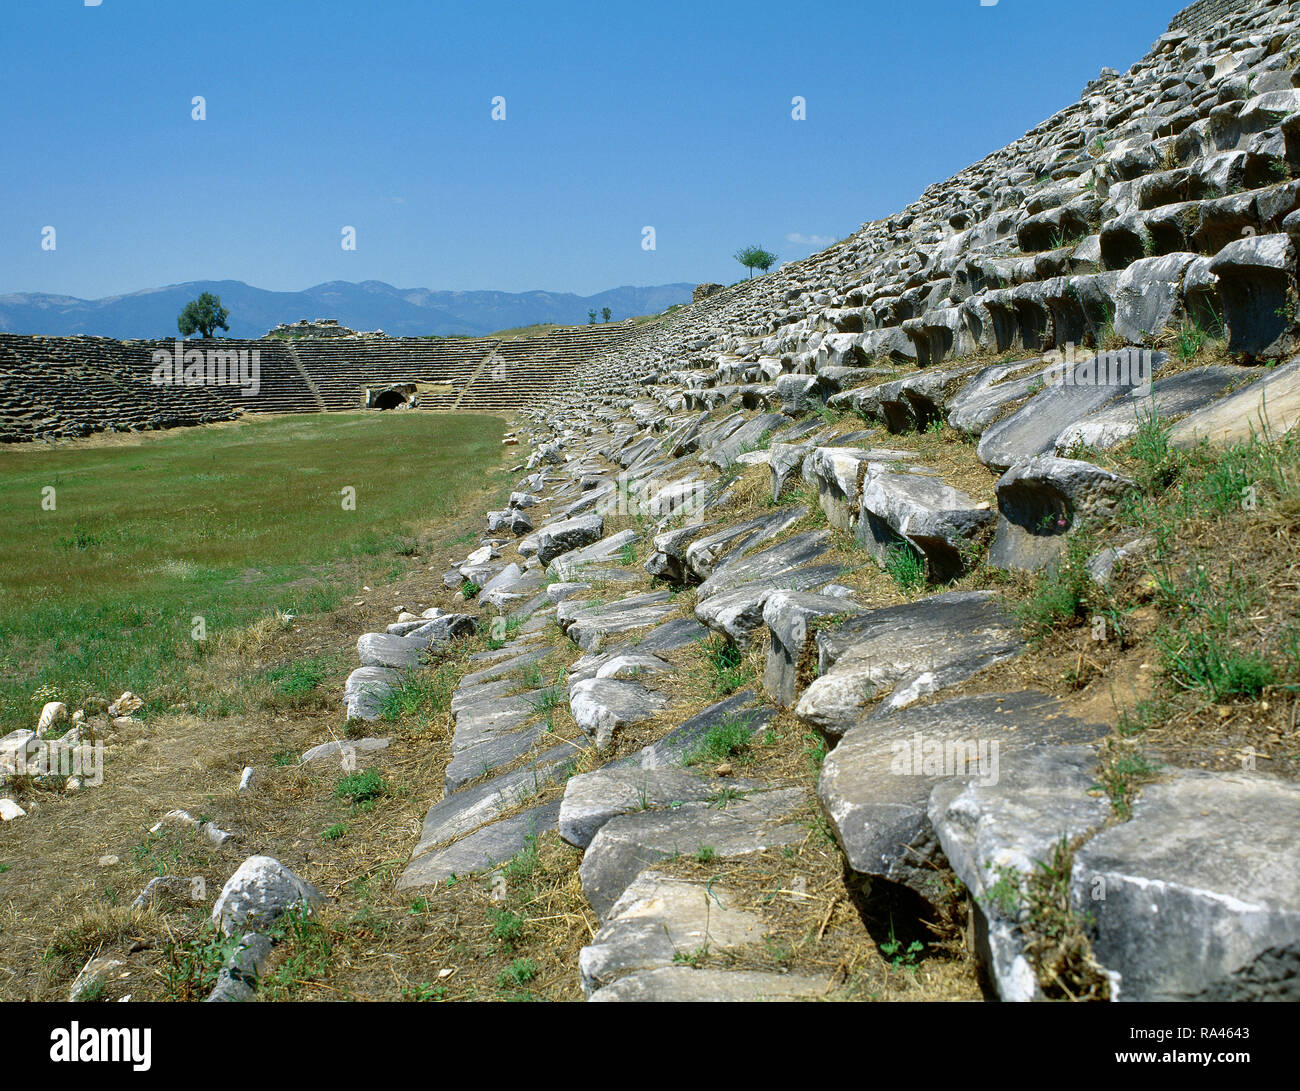 Turkey. Aphrodisias. Ancient Greek Classical city. The Stadium. It was built in the later 1st century AD. Originally designed for athletic contests. Stock Photo